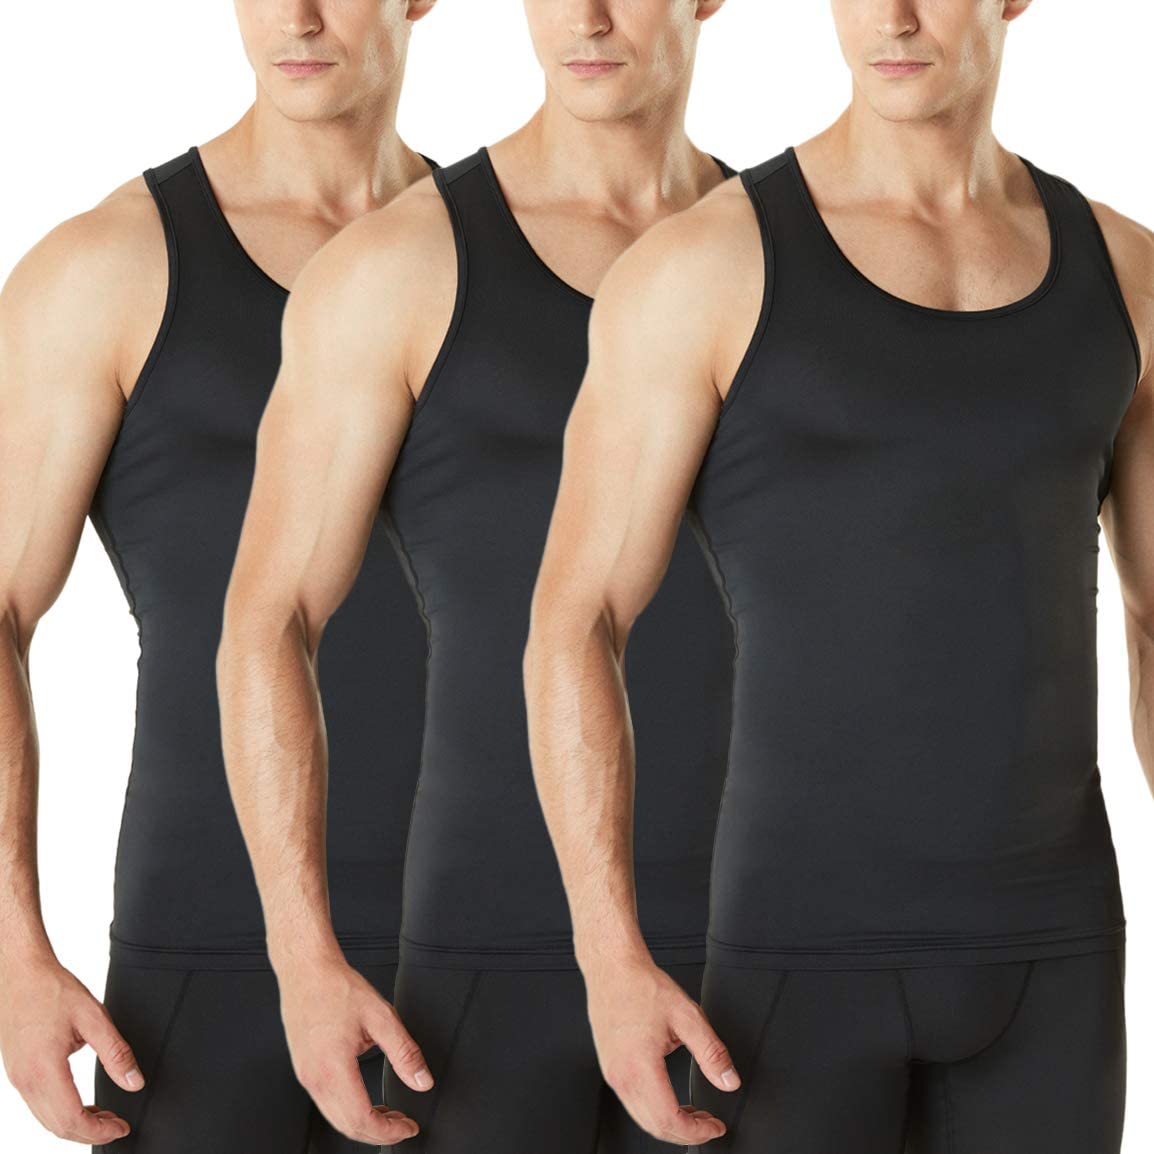 Dry Fit Workout Gym Tank Tops Performance Athletic Muscle Shirts TSLA 1 or 3 Pack Mens Sleeveless Running Tank Top